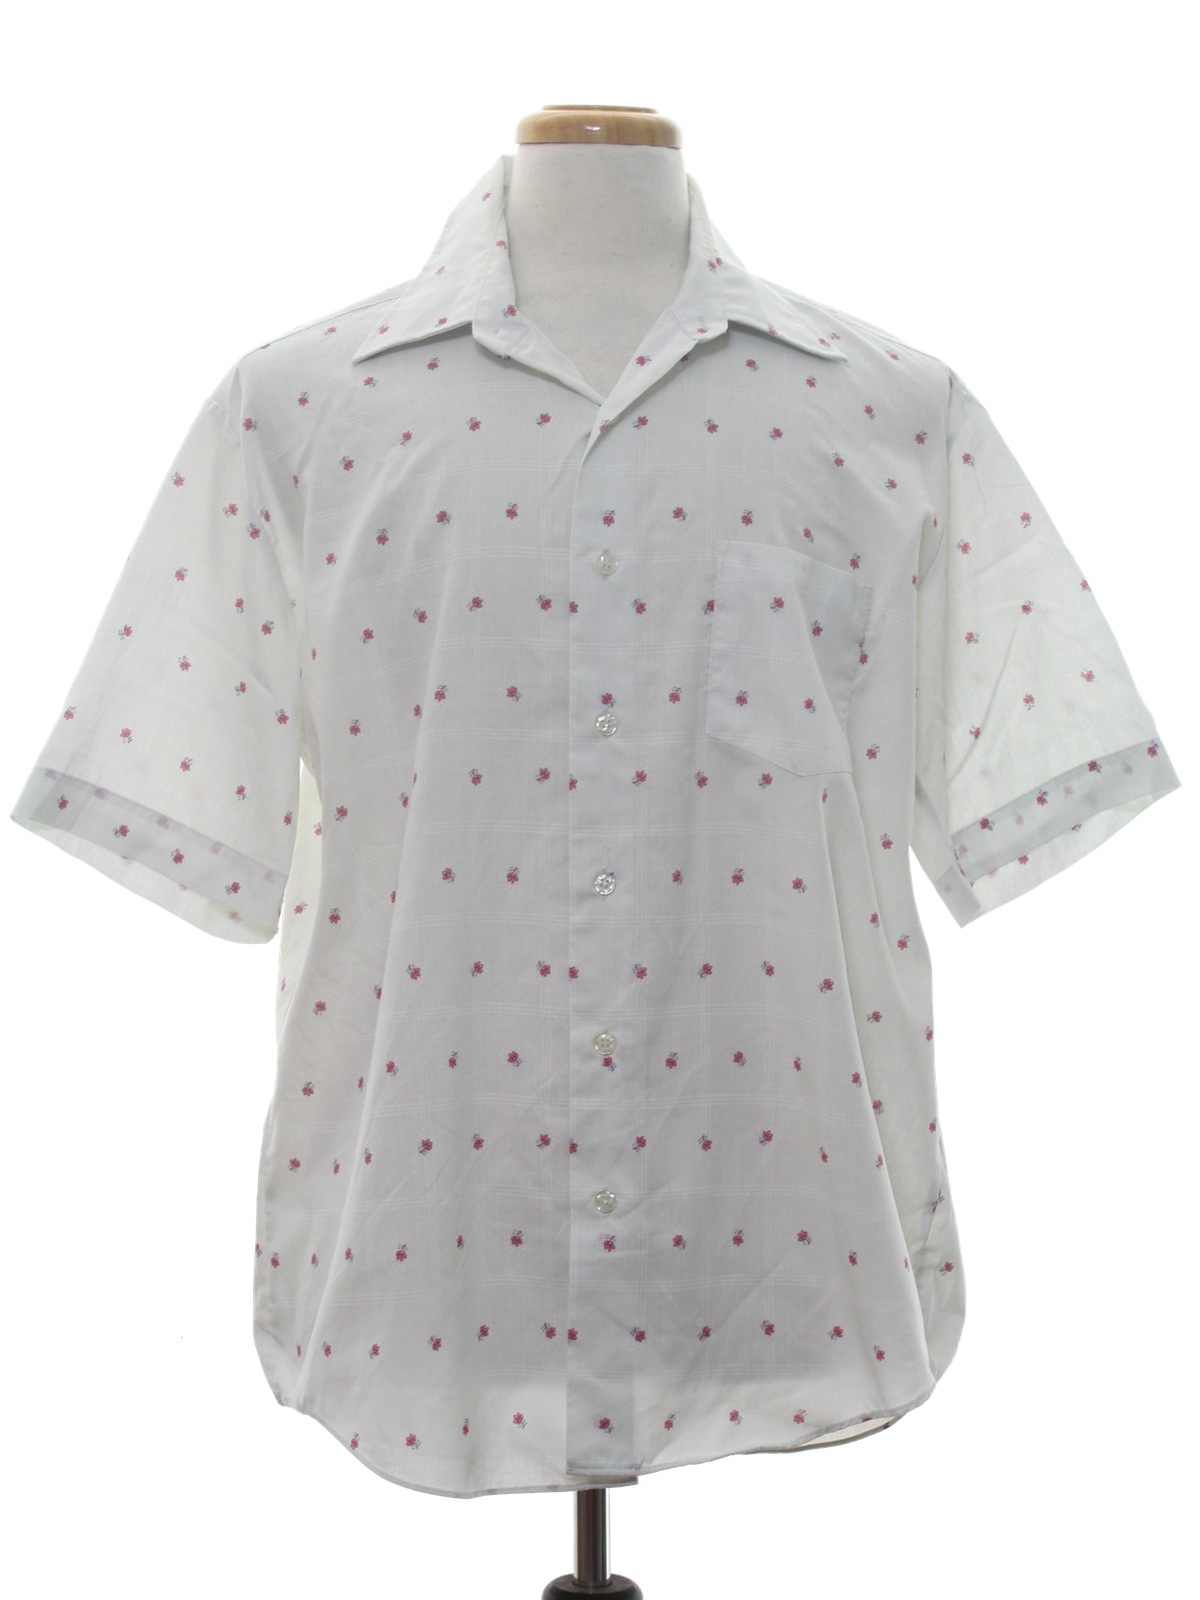 70s Vintage Wedgefield Shirt: Late 70s or early 80s -Wedgefield- Mens ...